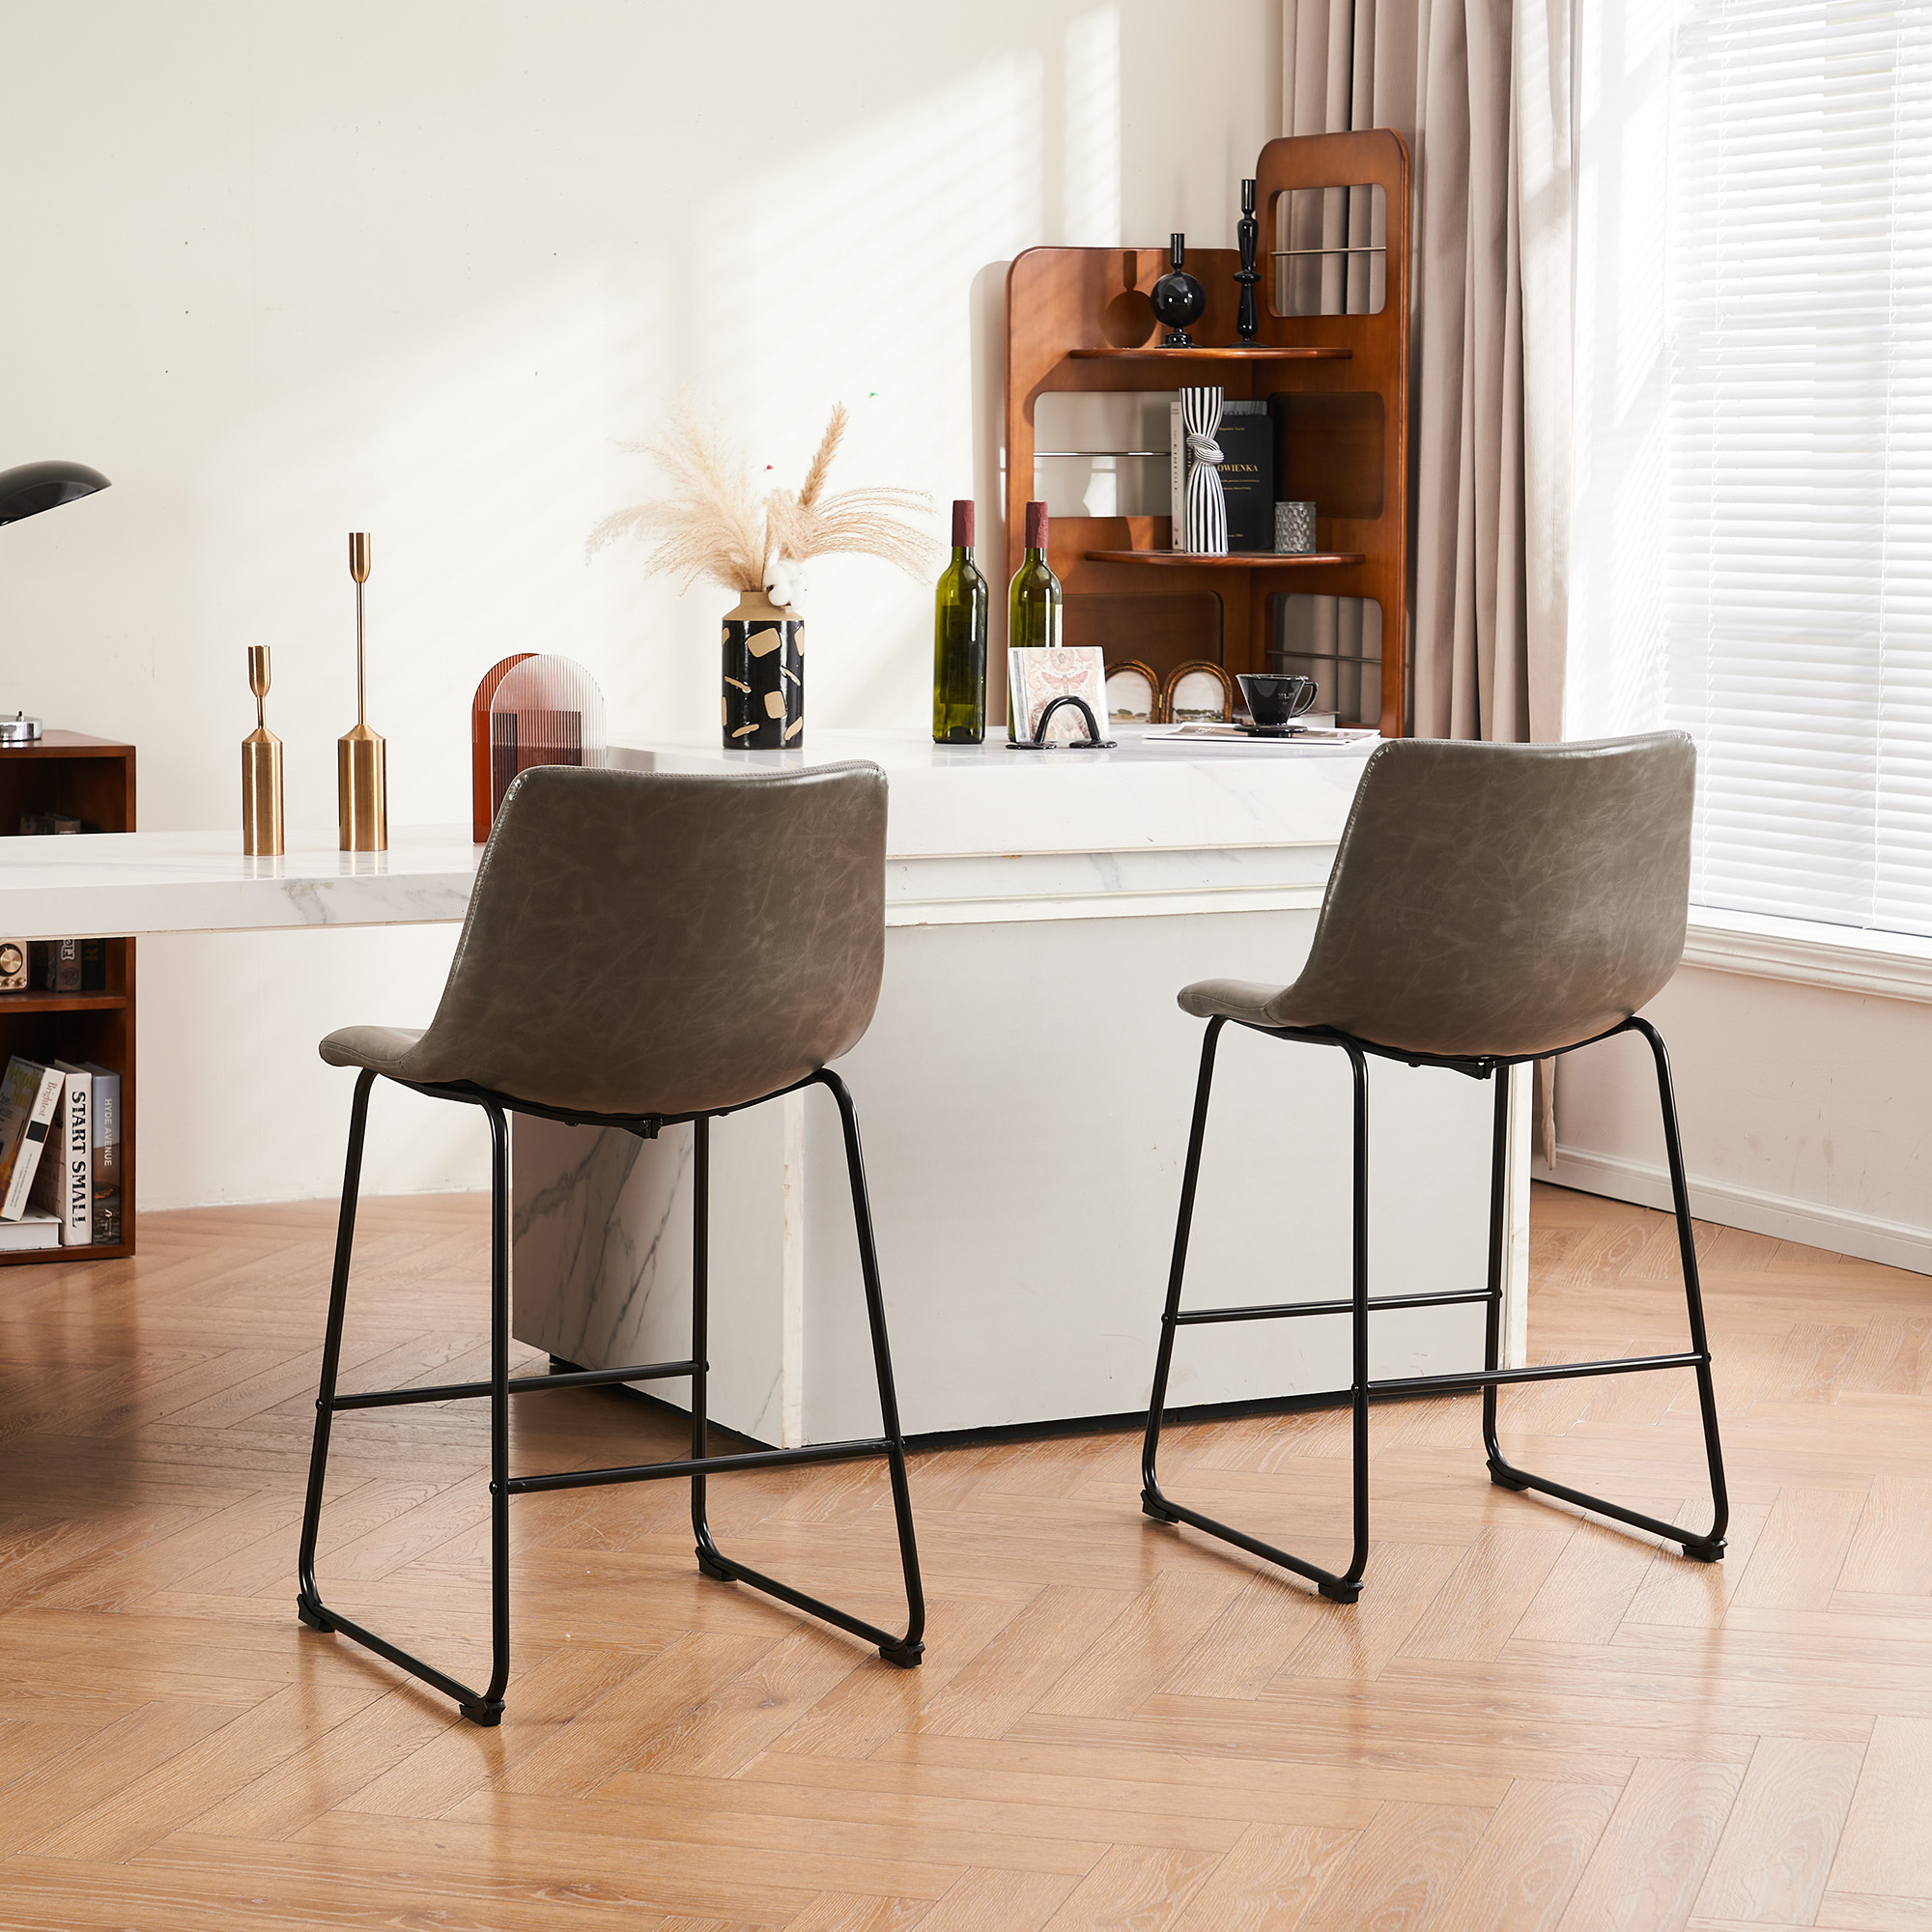 Modern Counter Stool Faux Leather Barstools, Counter Height Bar Stools Set Of 2, 26 Inch Seat Height & 30 Inch Seat Height - 26 Inch